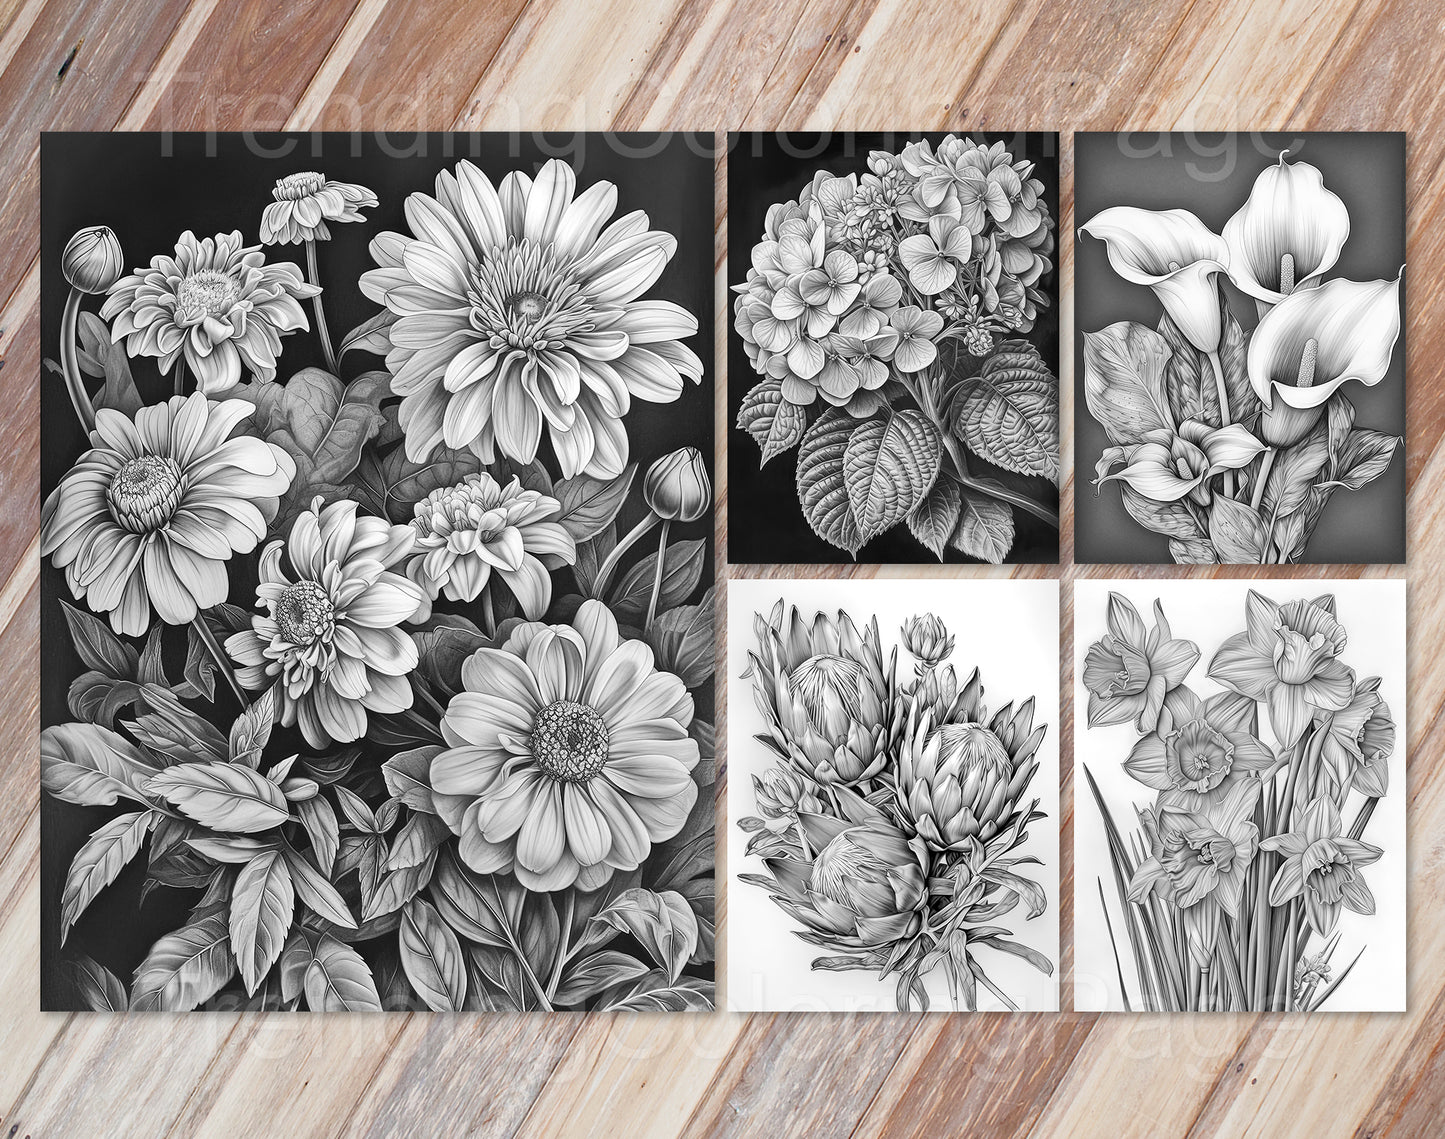 30 Enchanted Blooms Grayscale Coloring Pages - Instant Download - Printable PDF Dark/Light